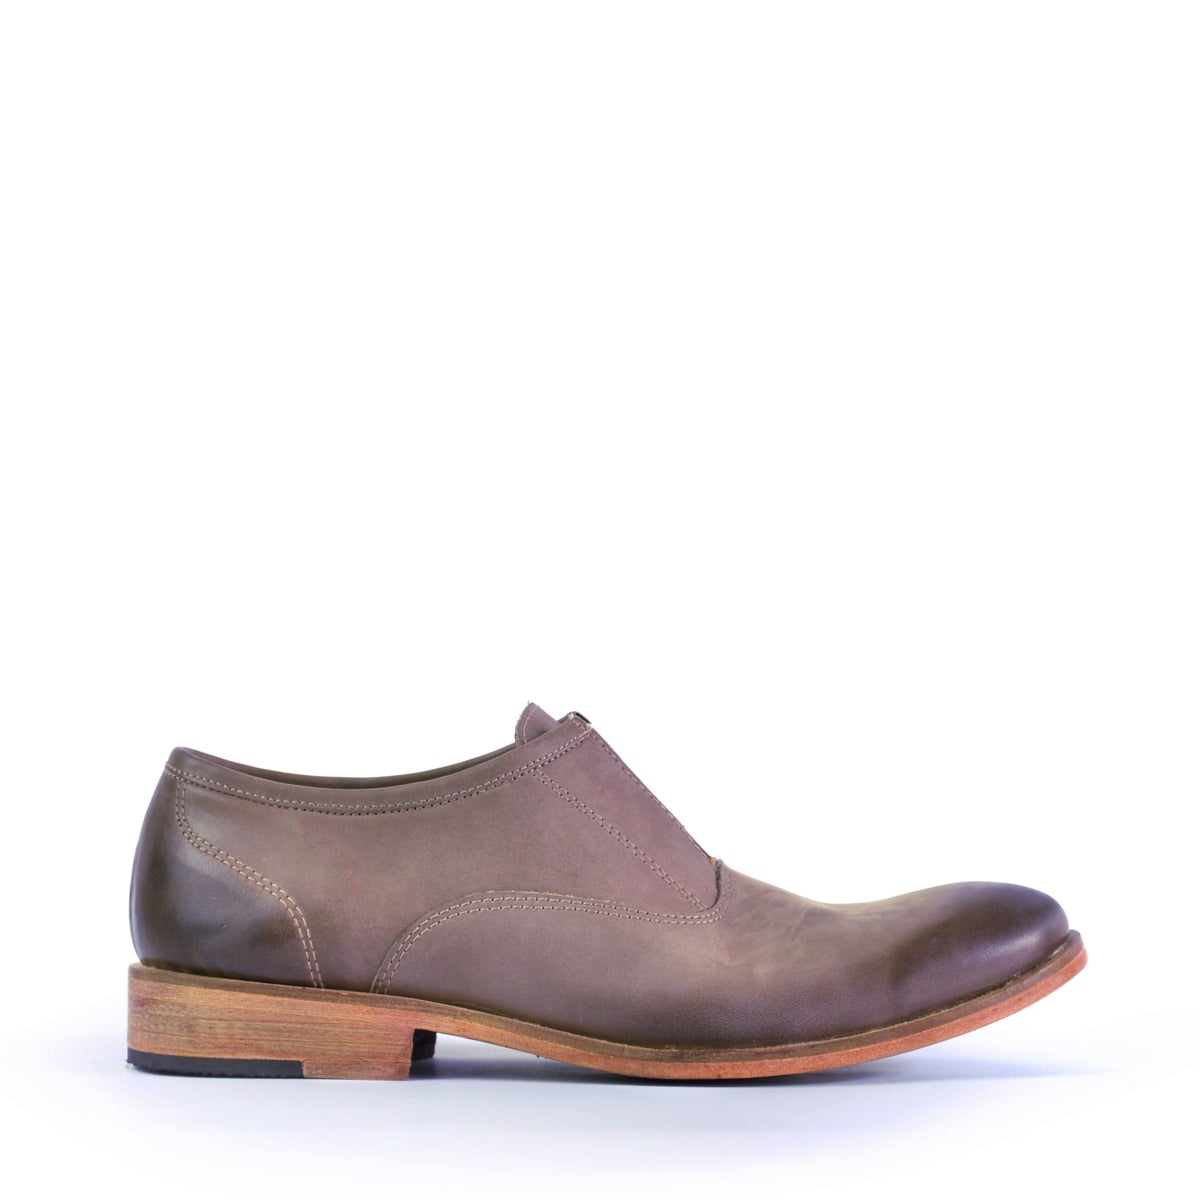 Chelo Gun - Leather Shoes